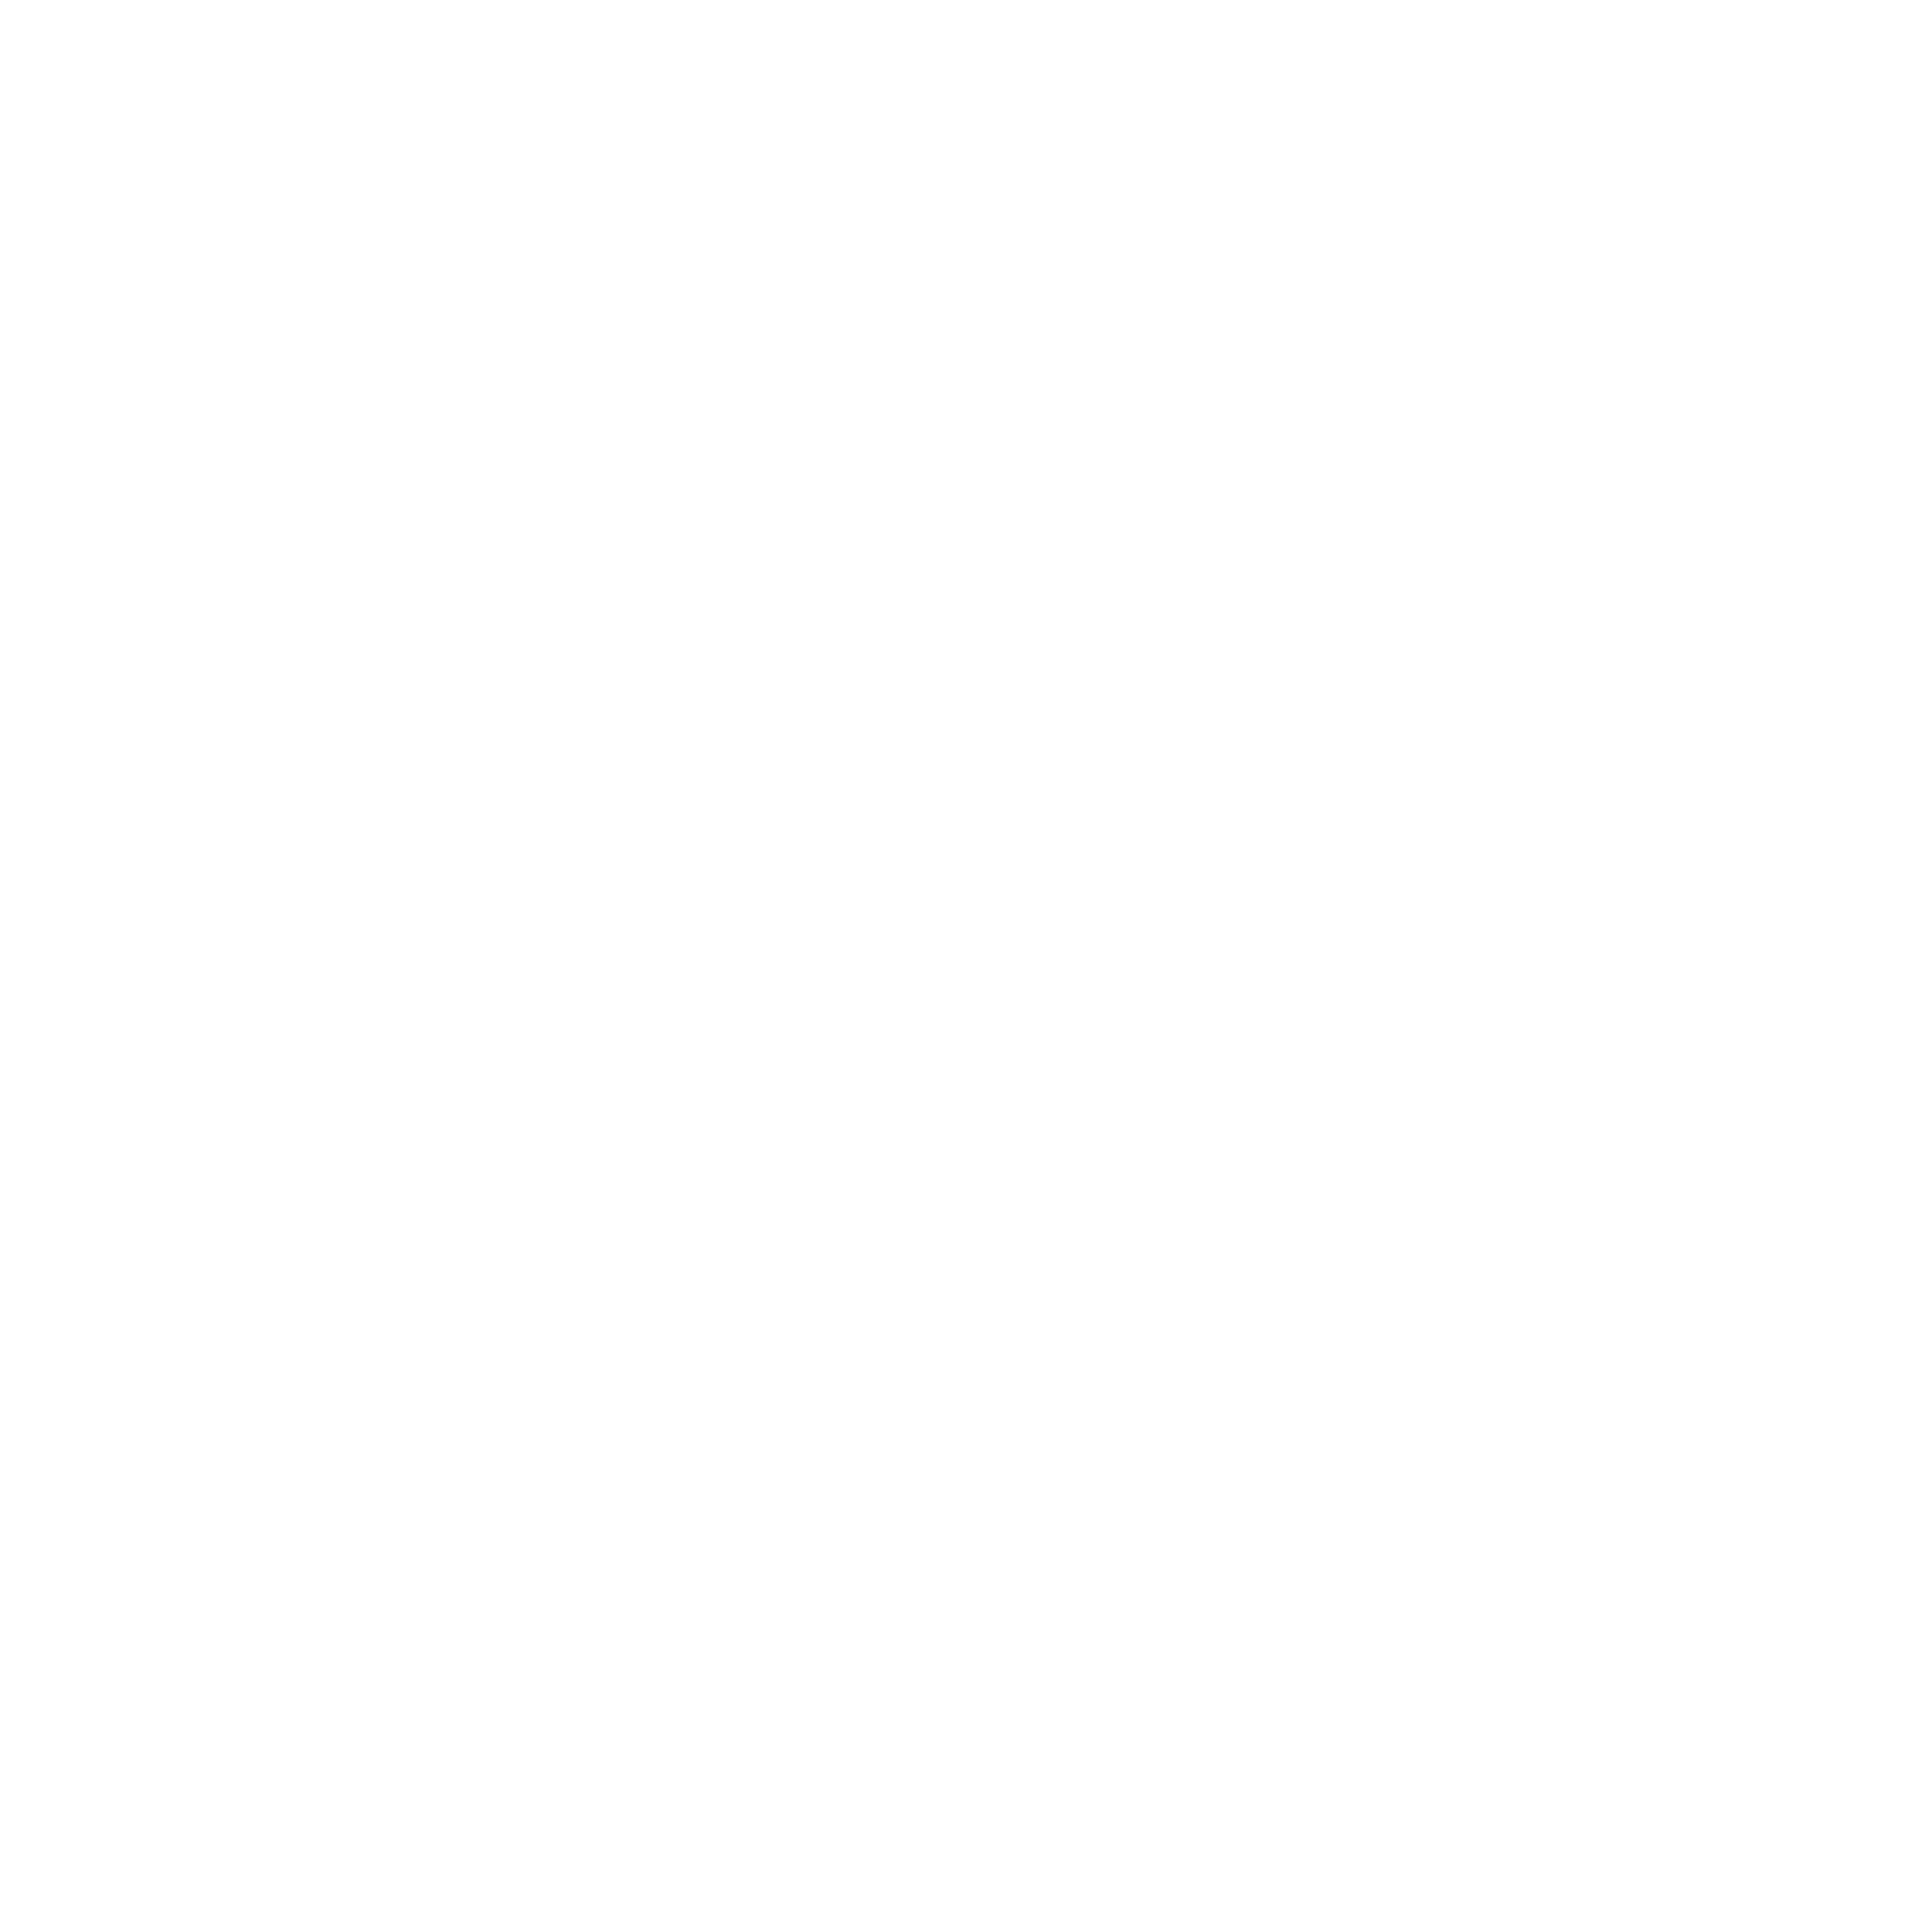 Experience The Wonder of Tim and Amanda Cowles